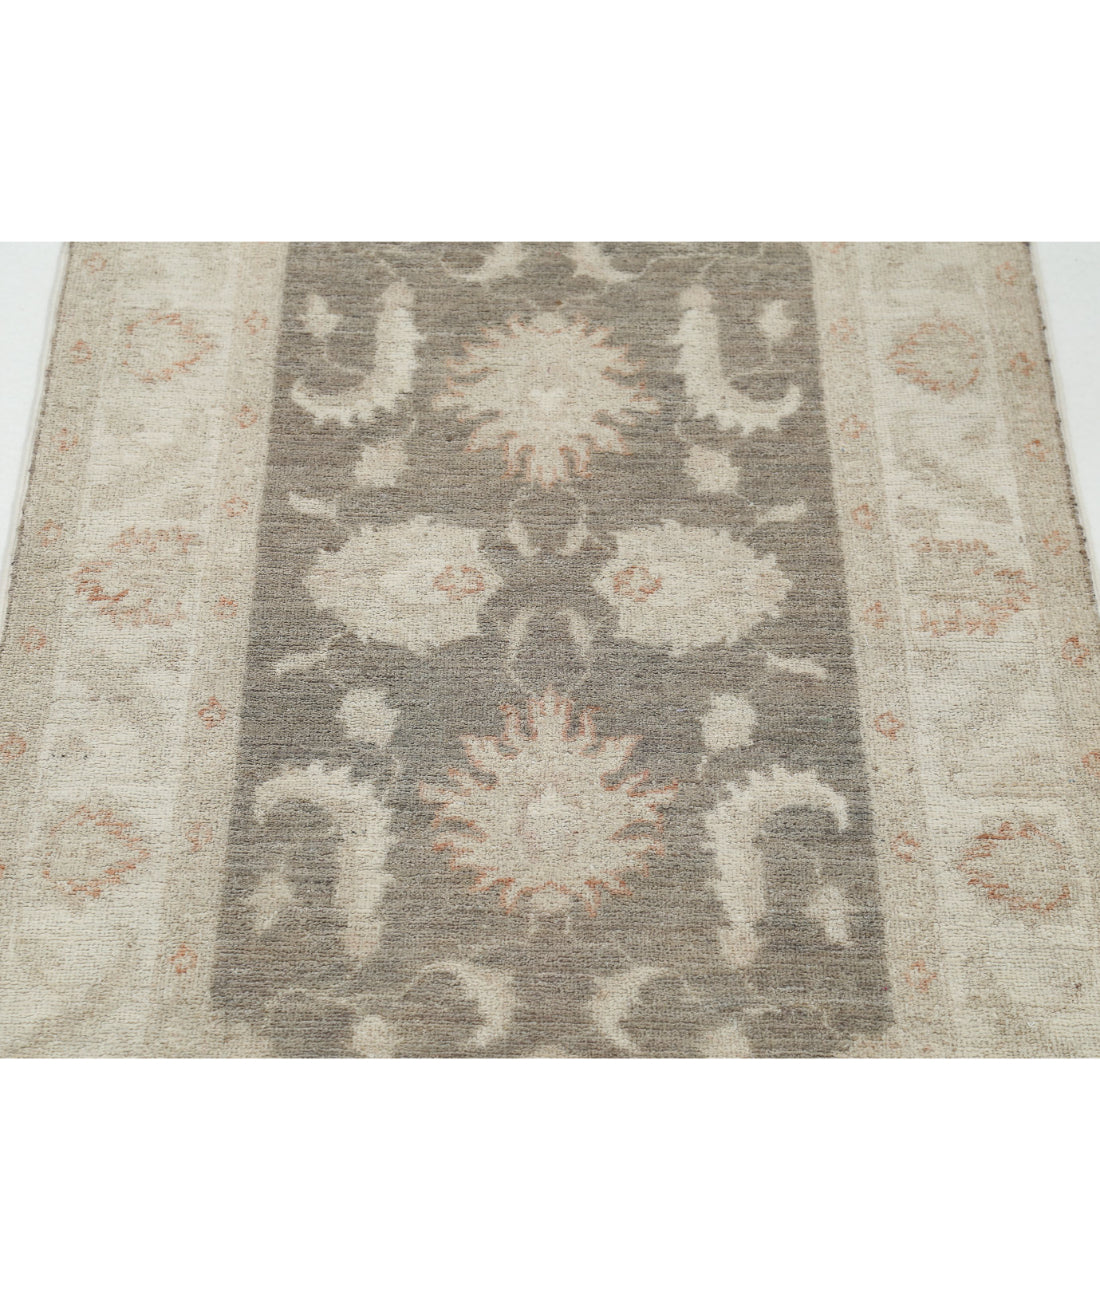 Hand Knotted Serenity Wool Rug - 2'7'' x 3'11'' 2'7'' x 3'11'' (78 X 118) / Brown / Ivory